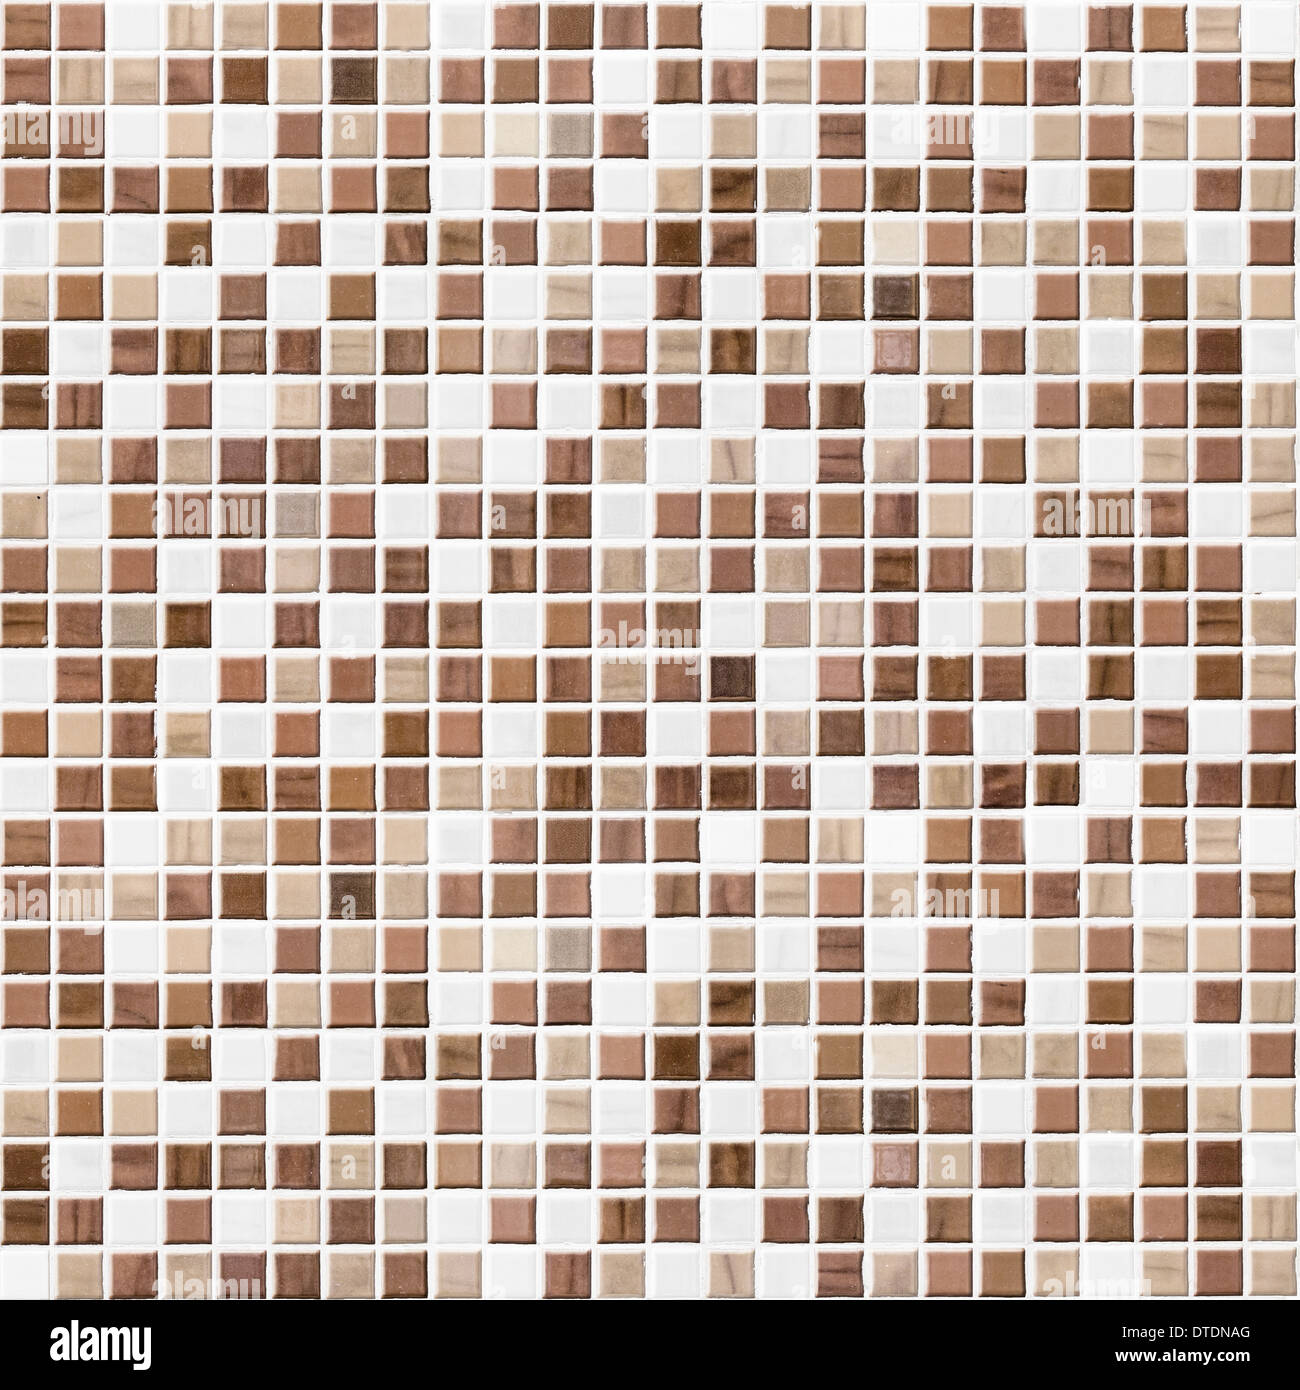 Kitchen Tile Texture High Resolution Stock Photography and Images ...